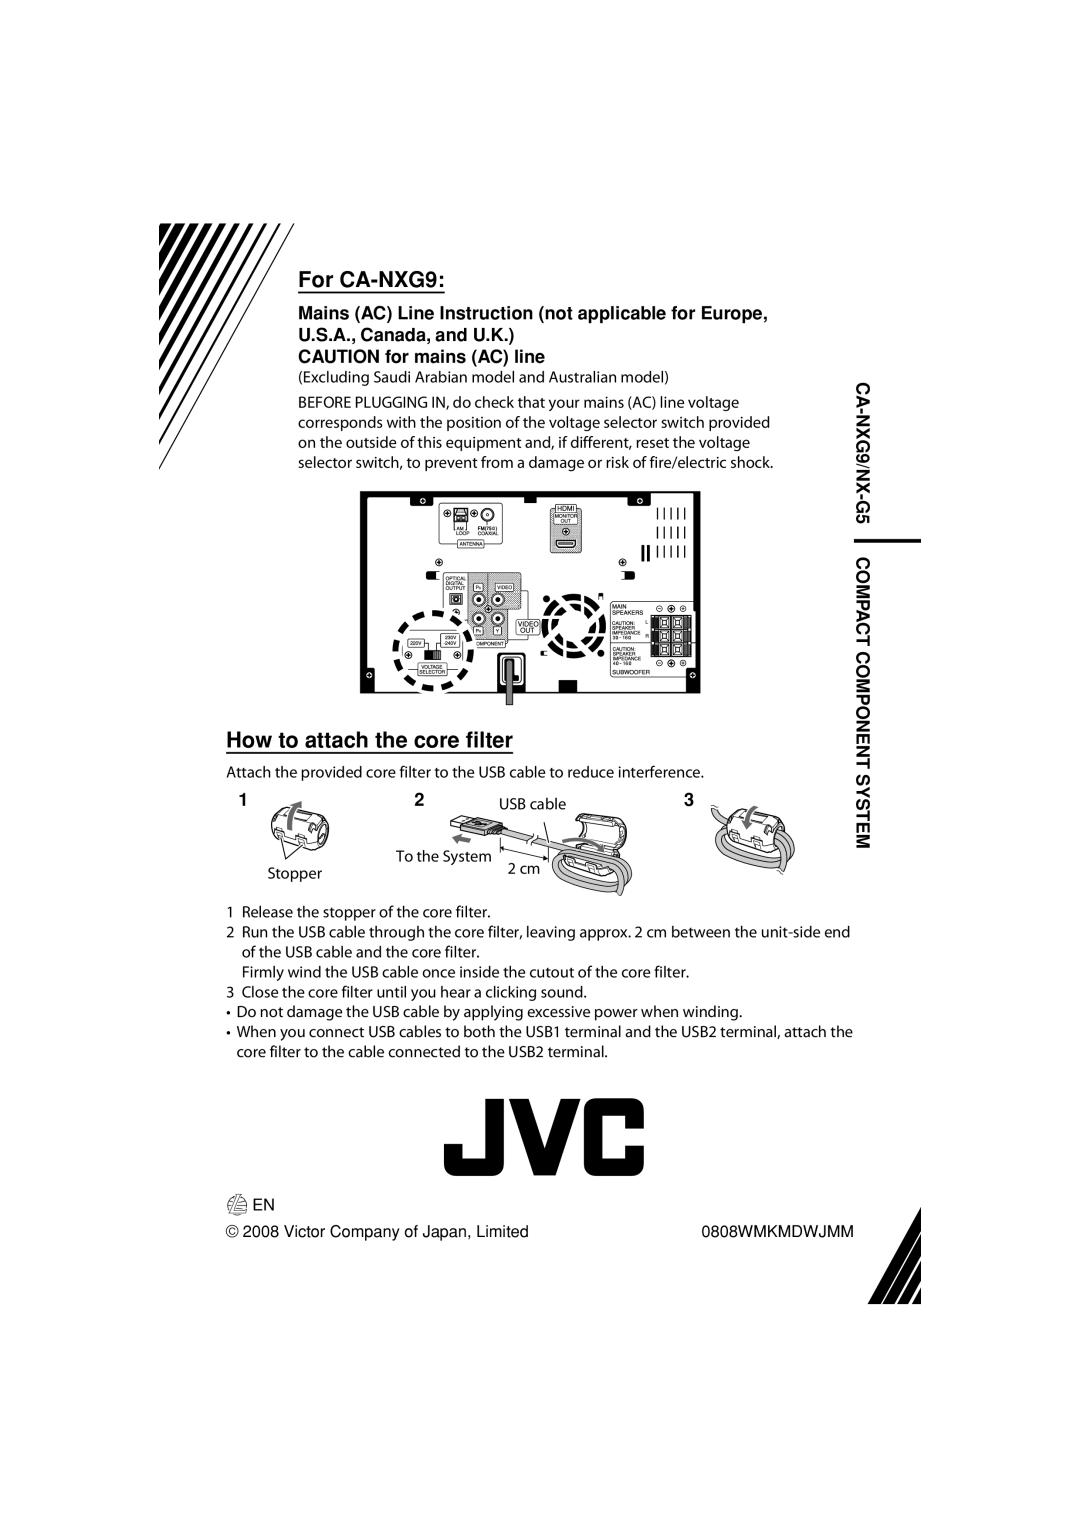 JVC manual For CA-NXG9, How to attach the core filter, CAUTION for mains AC line, CA-NXG9/NX-G5COMPACT COMPONENT SYSTEM 